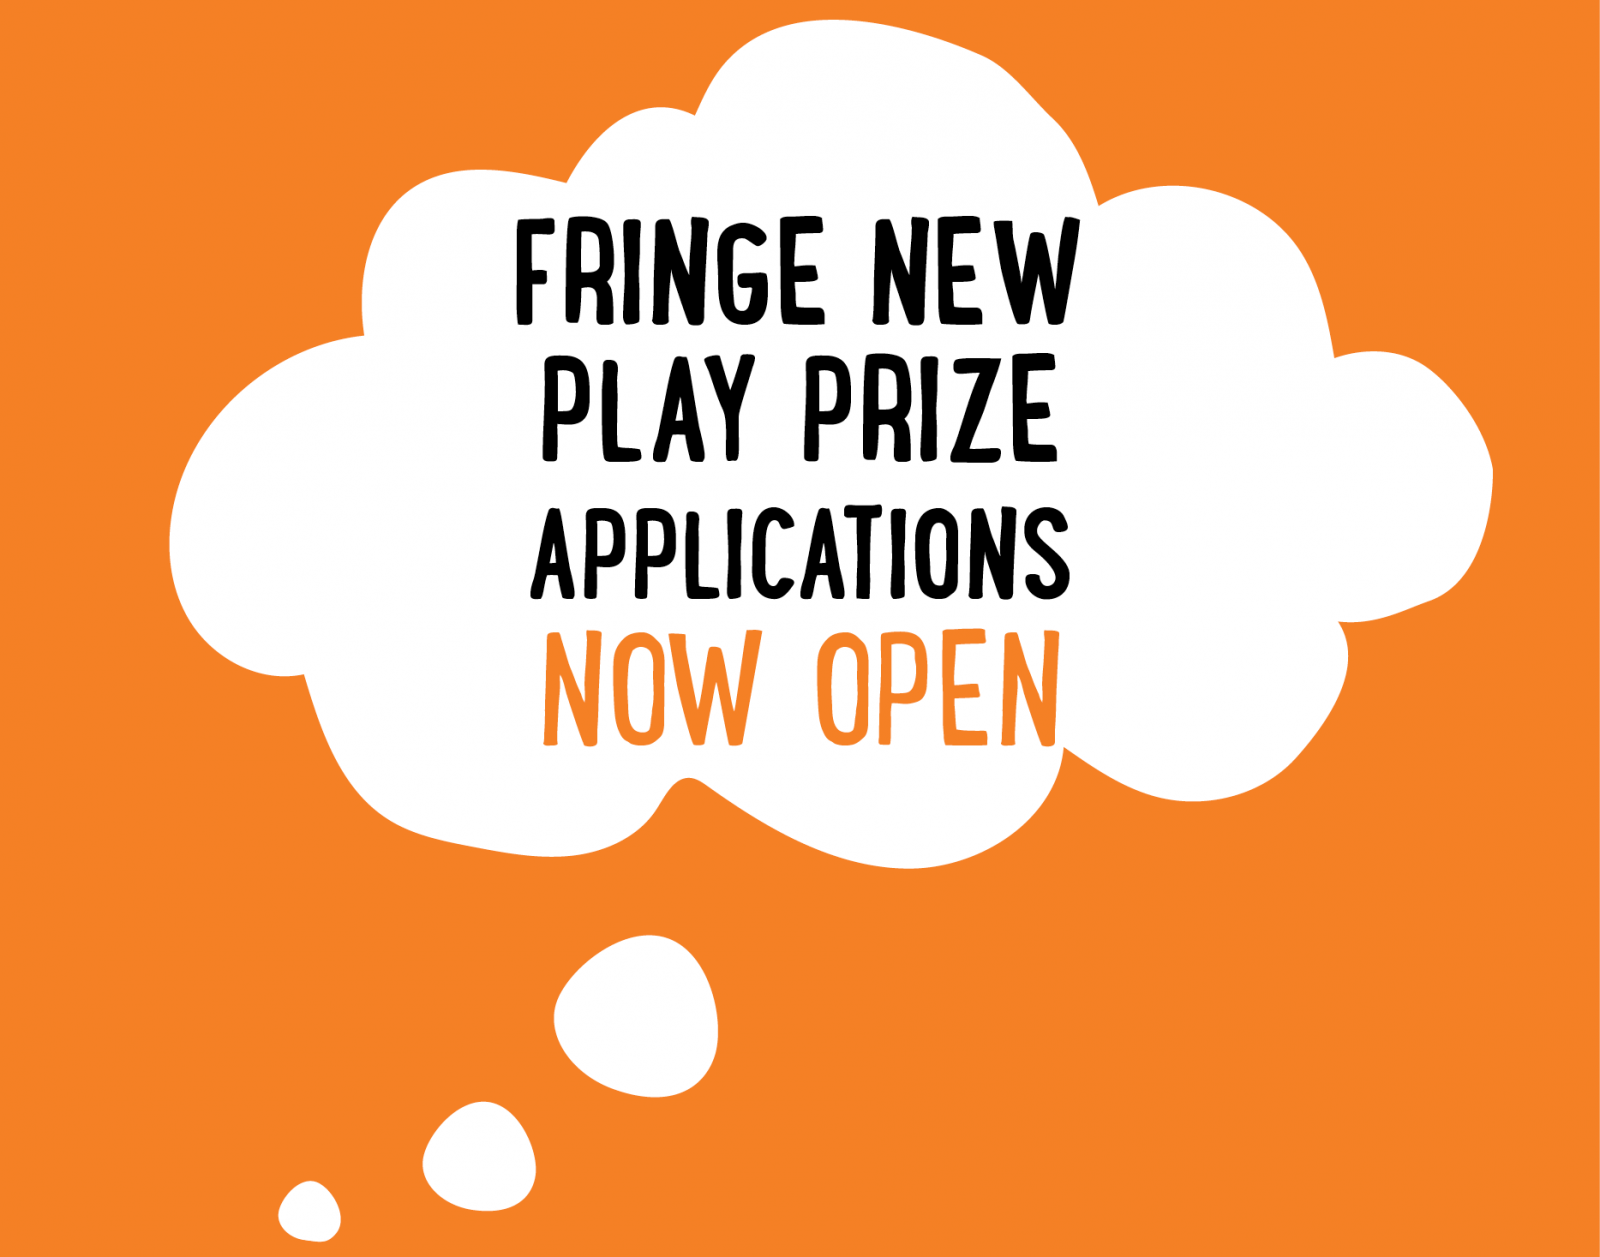 FNPP Applications Now Open Thought Bubble Ad